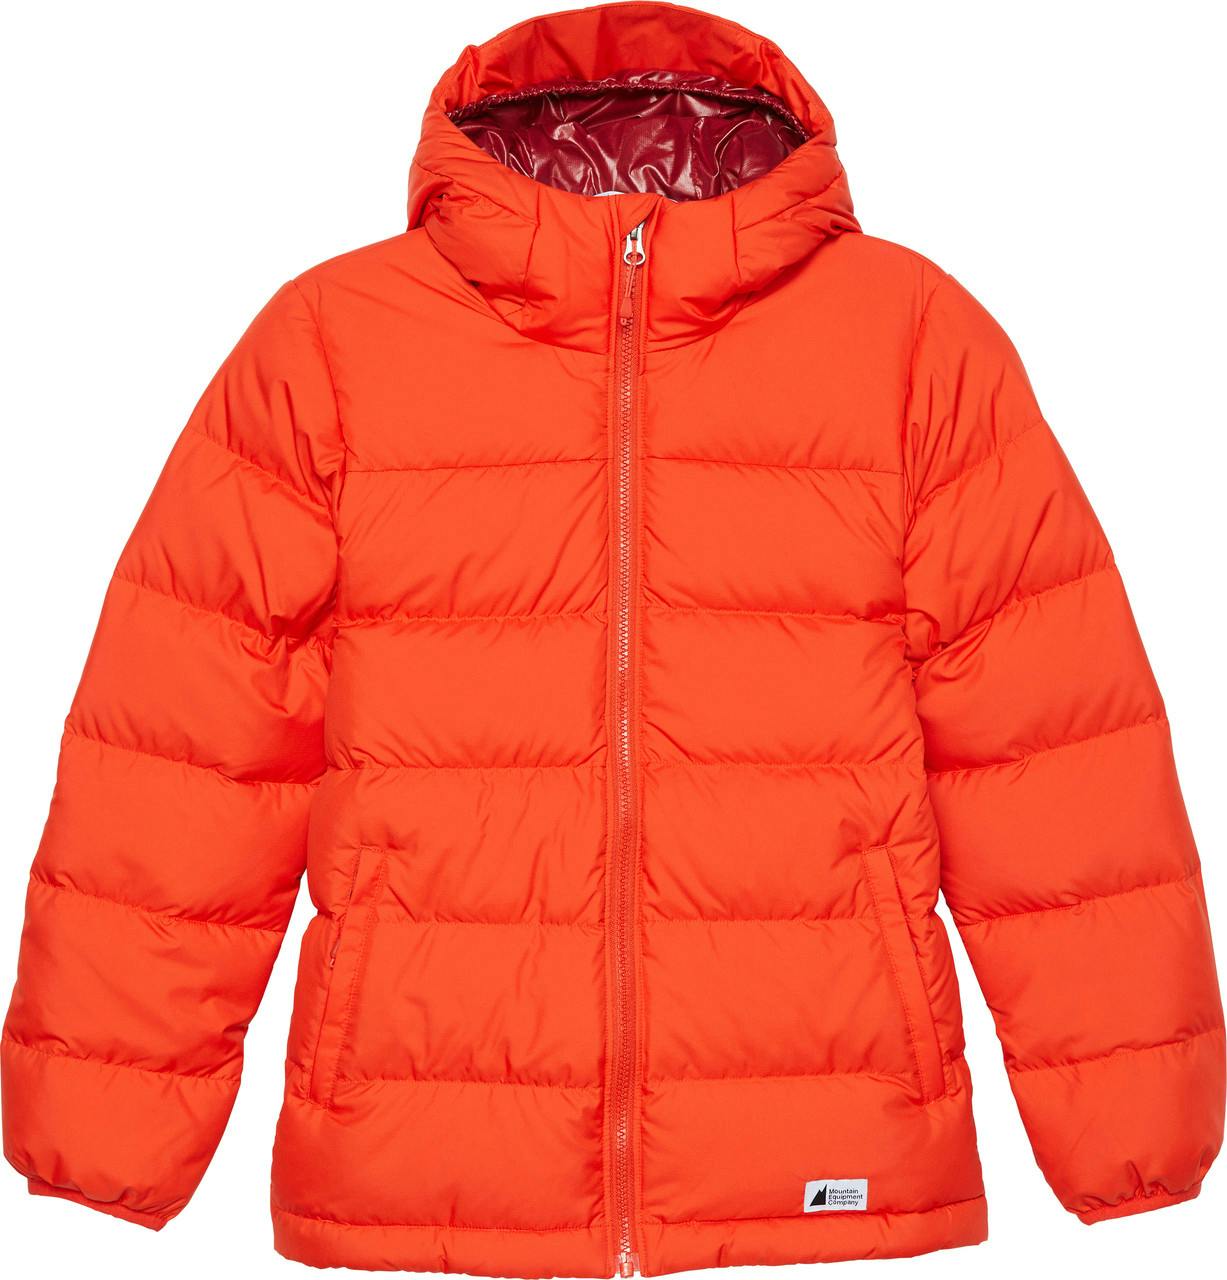 Tremblant Jacket Fortune Red/Maroon